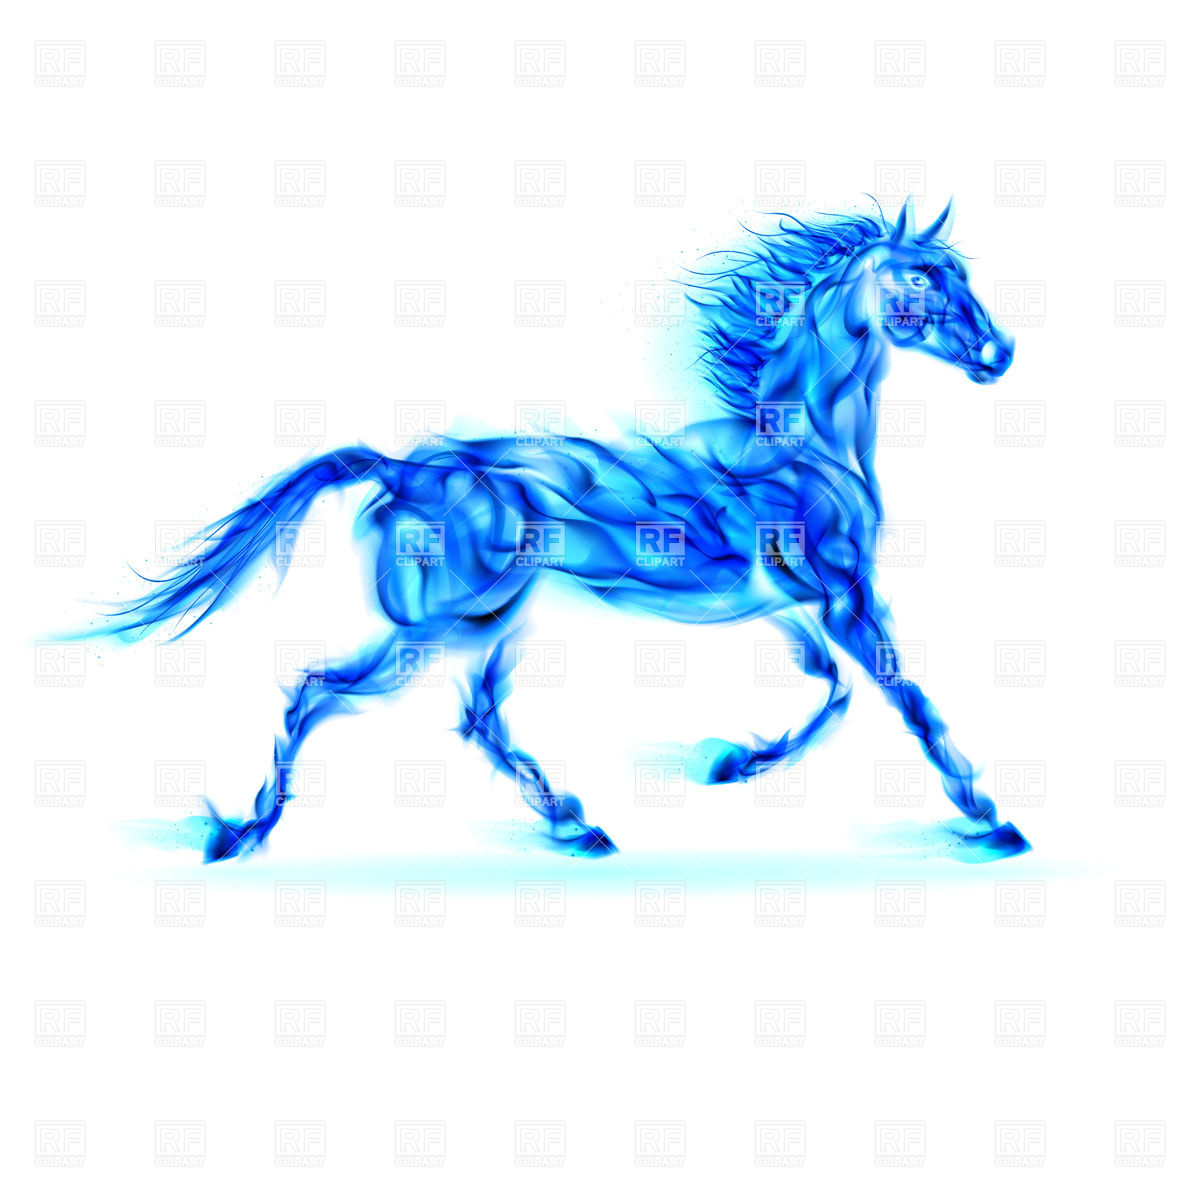 Blue Fire Horse In Motion On White Background 24888 Download Royalty